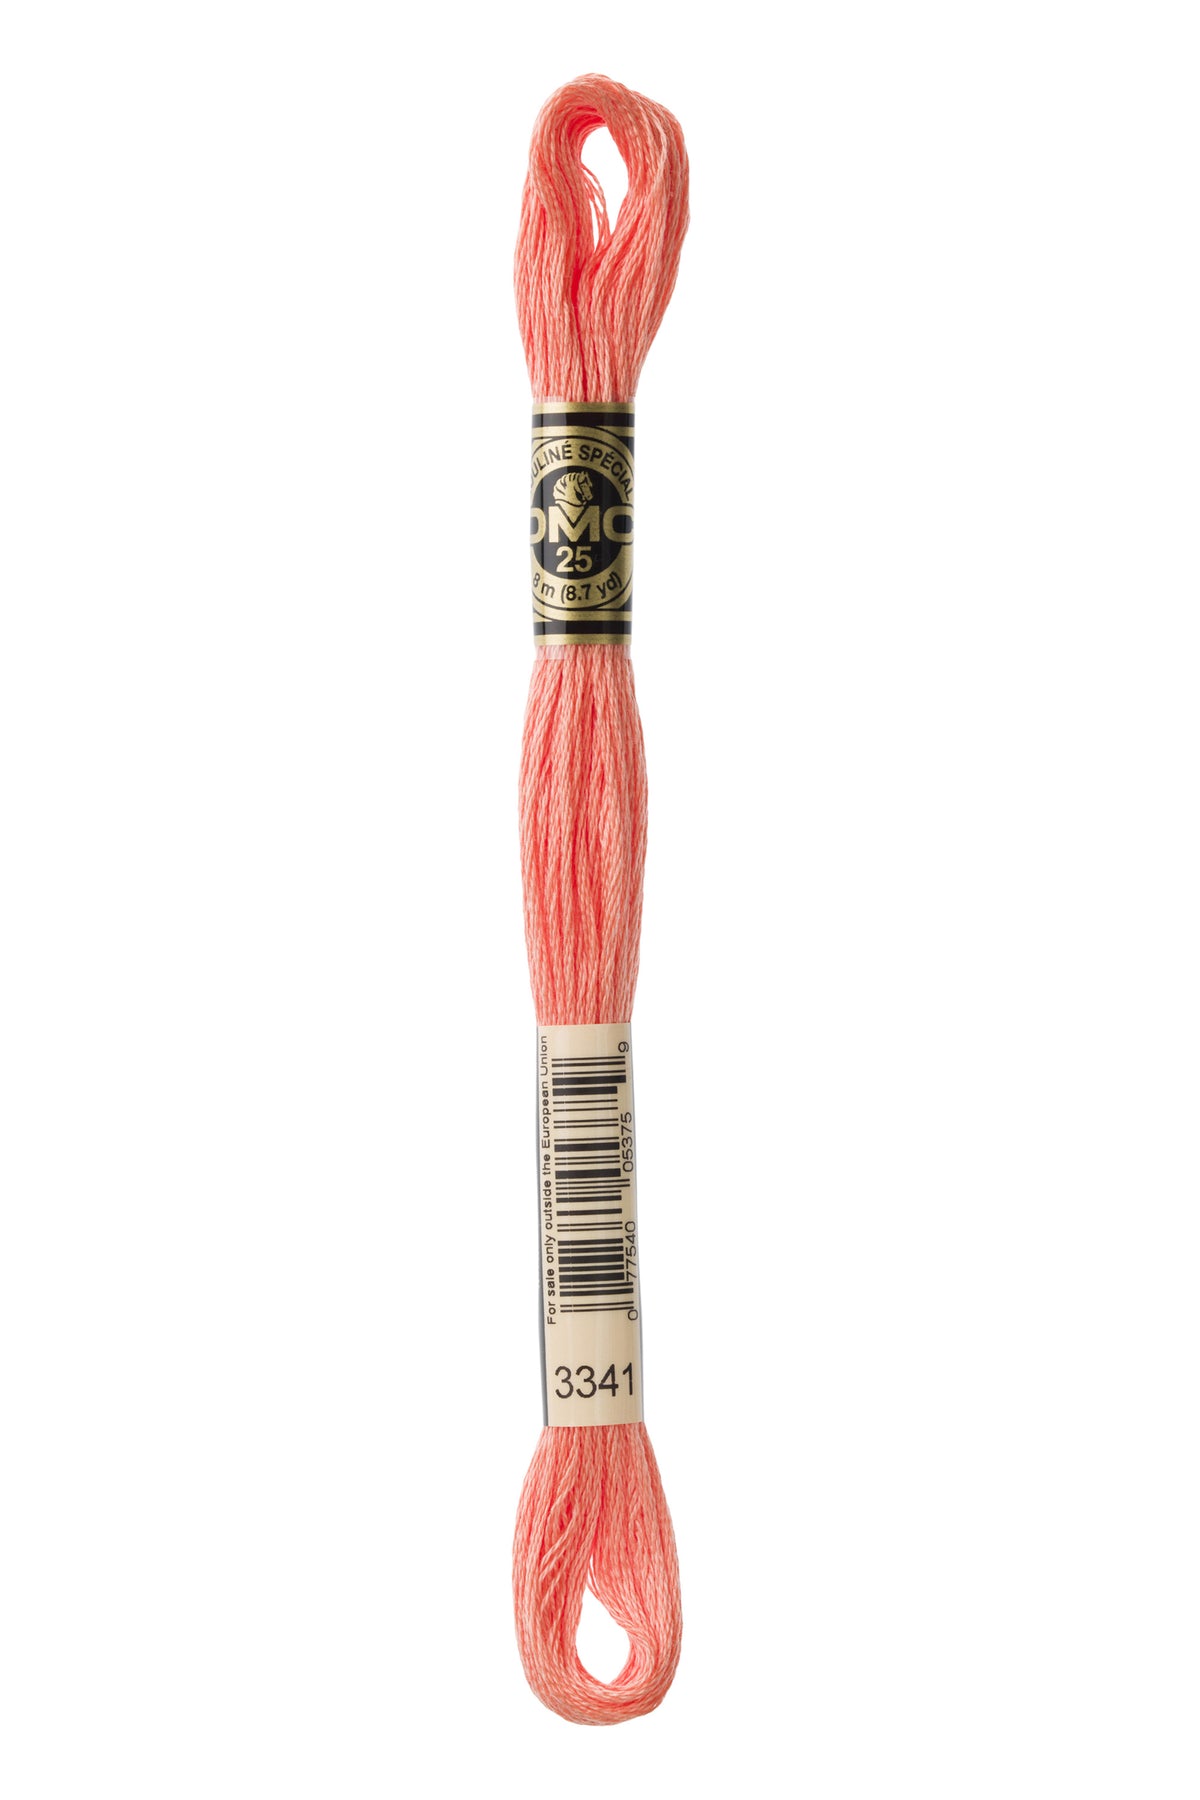 Cotton Six Stranded Embroidery Floss | DMC 917-3688